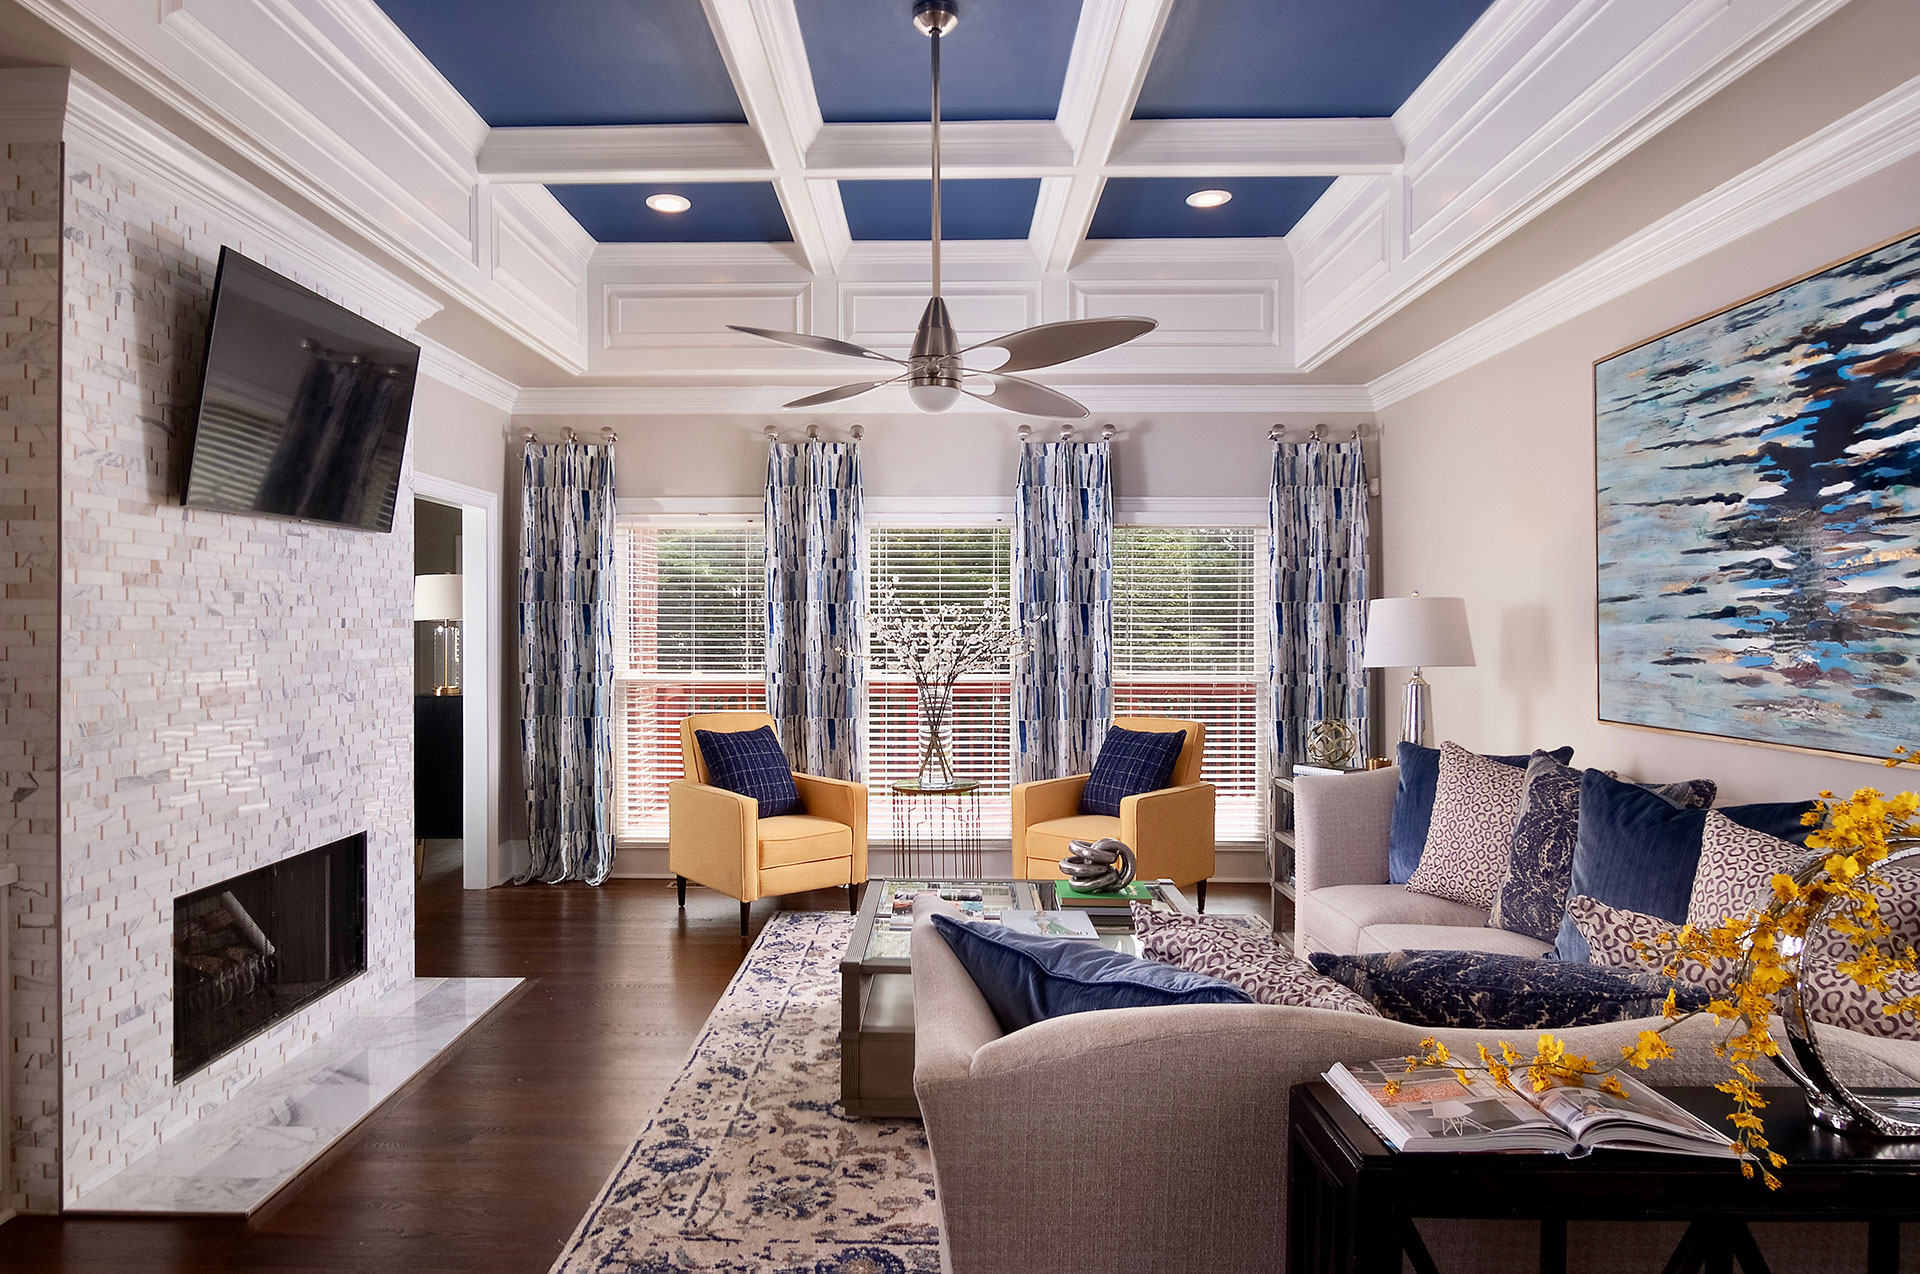 Look Up: Unique Ceiling Options Make A Statement